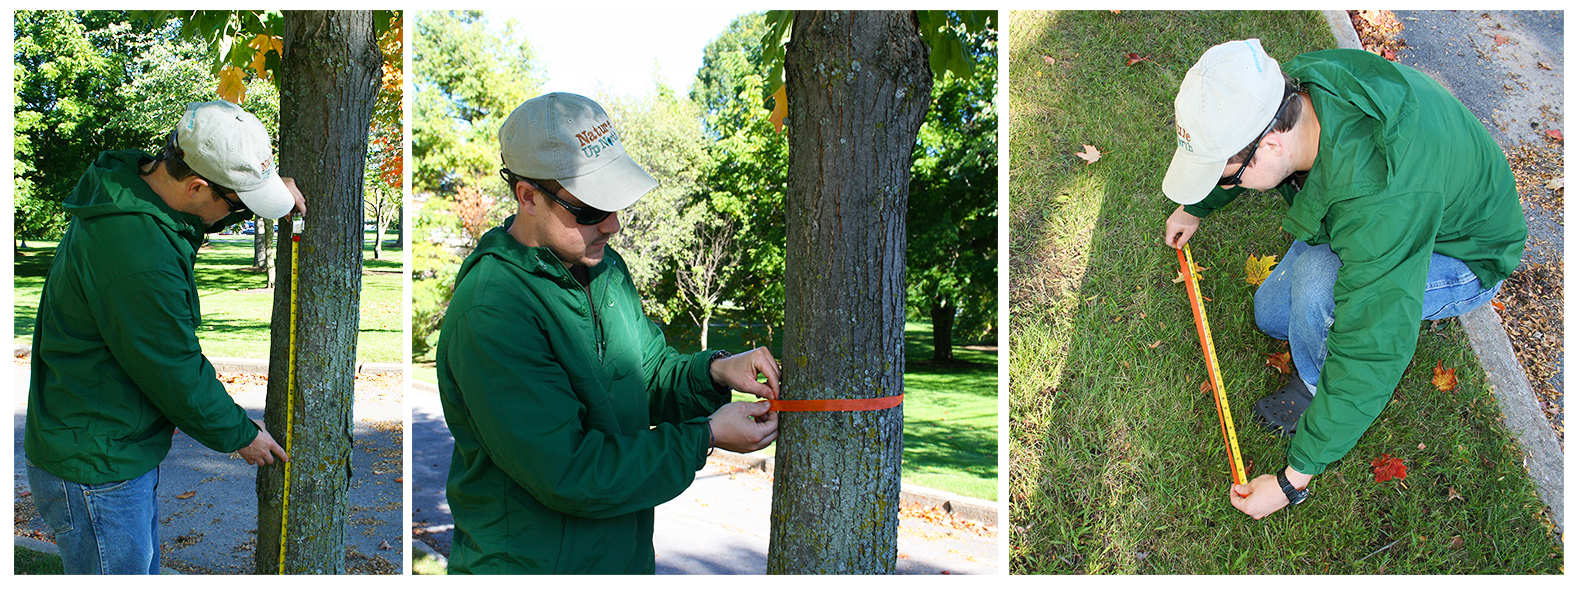 Measure the circumference of you maple tree with a cloth tape measure or string.